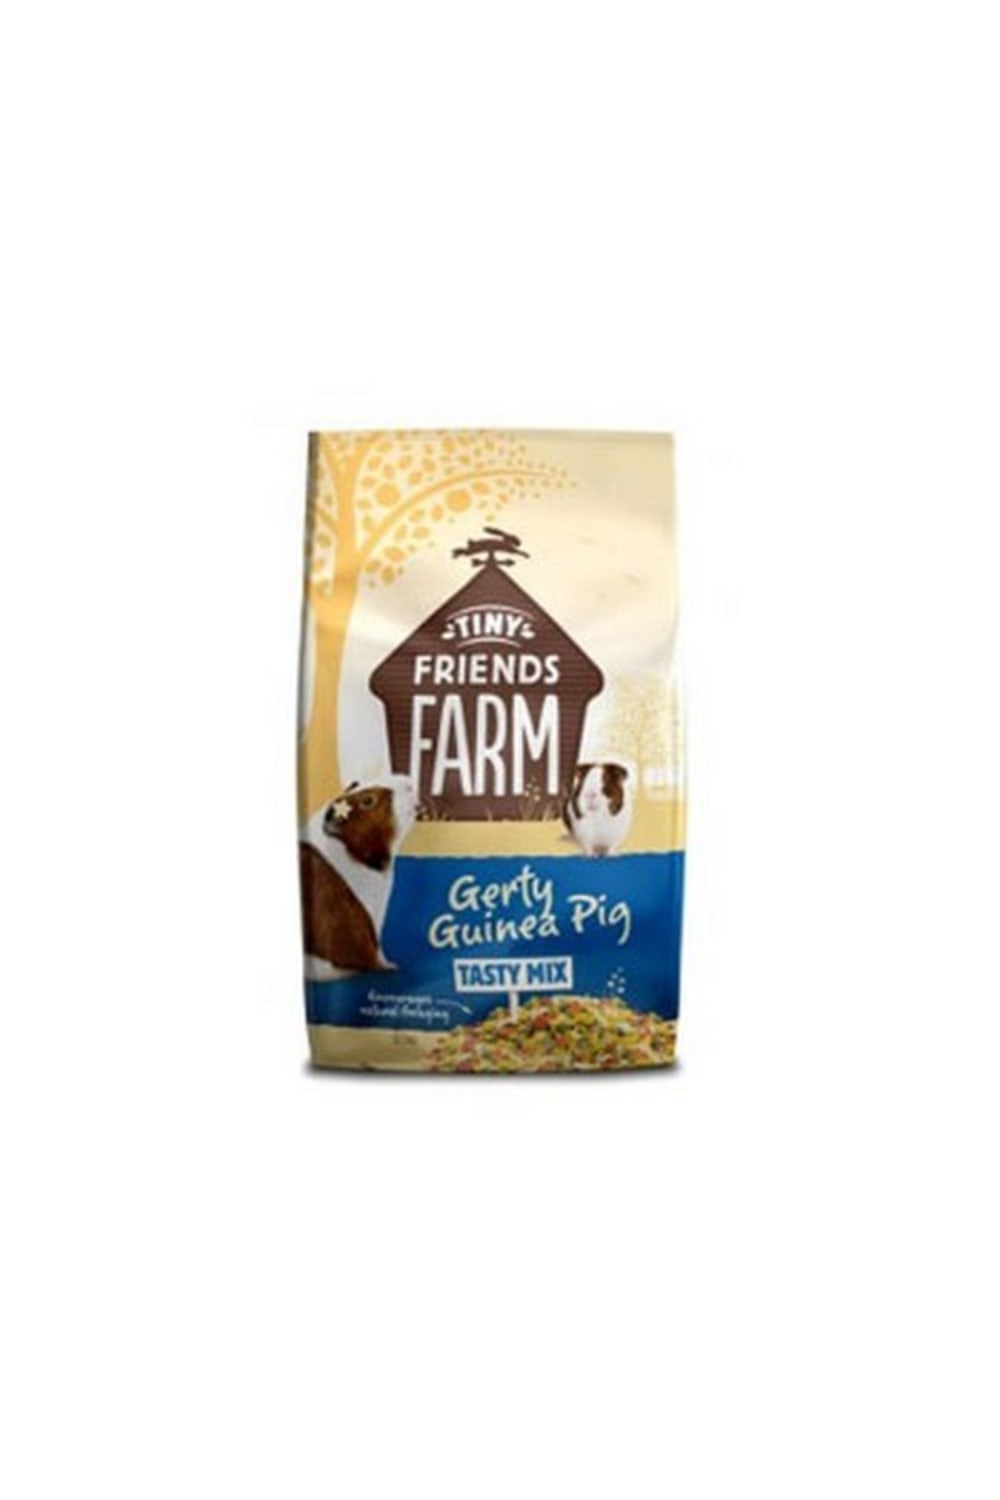 Supreme Tiny Friends Farm Gerty Guinea Pig Tasty Mix (May Vary) (11lbs)